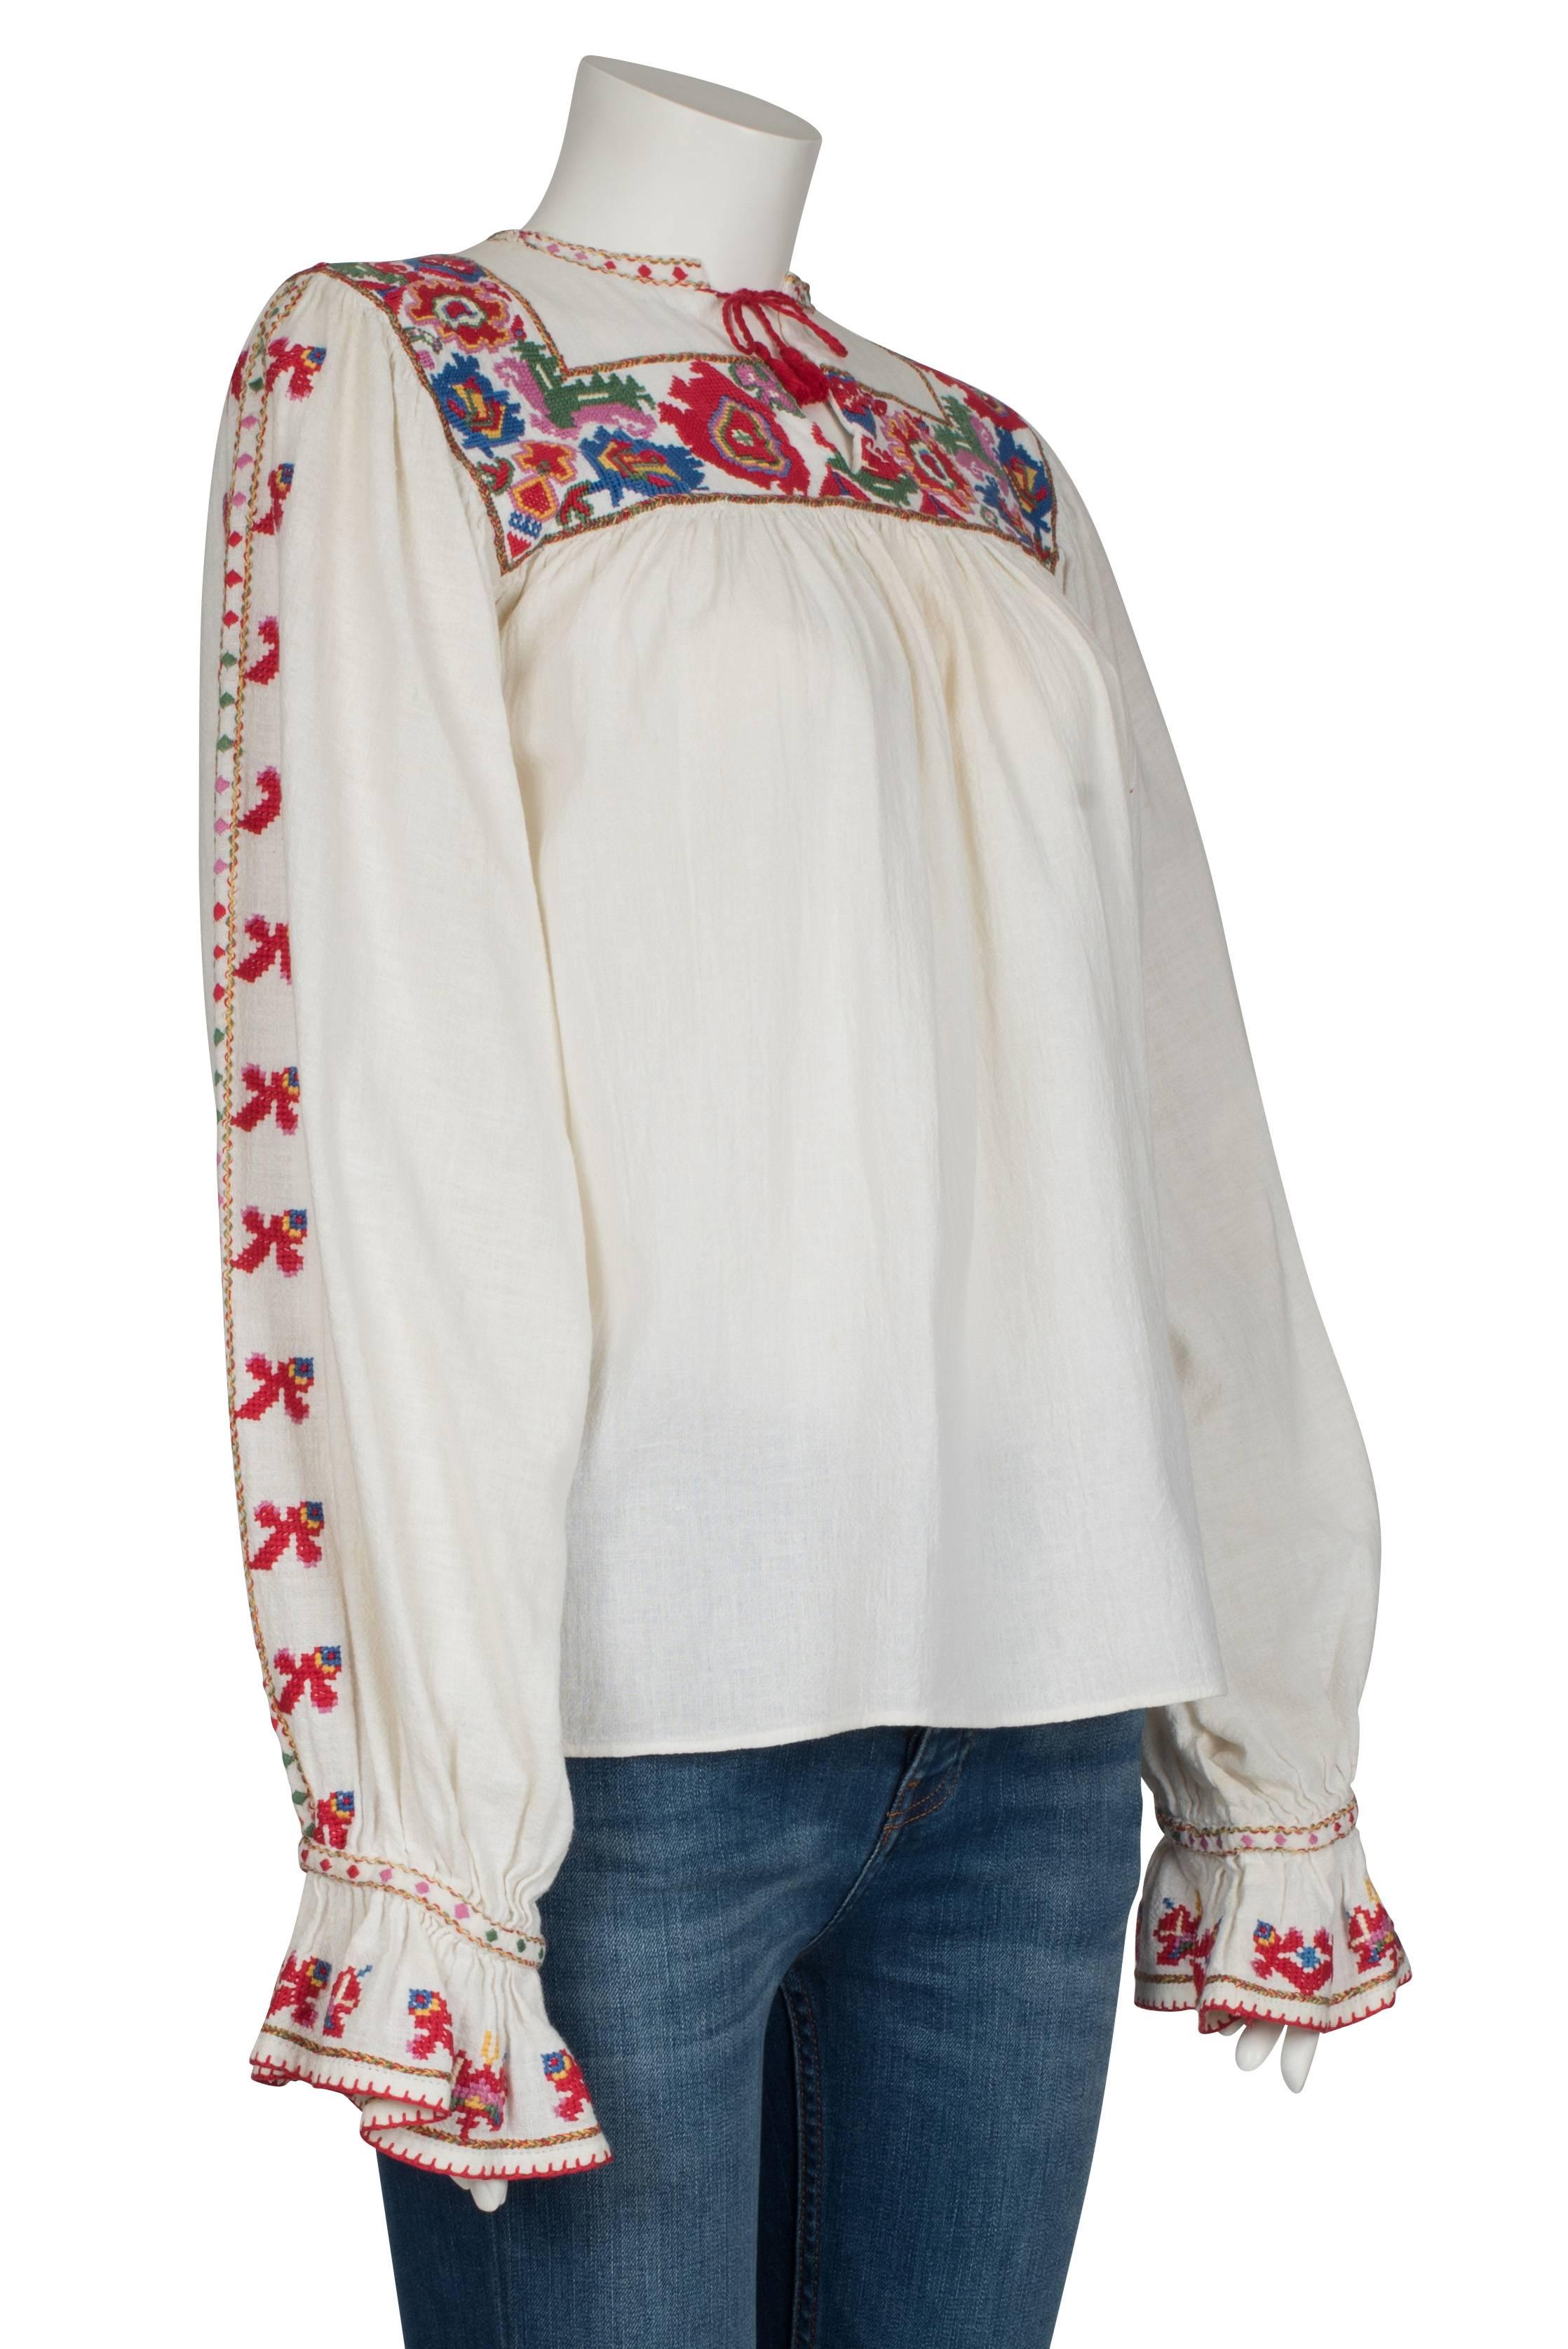 Women's Folk blouse with floral pattern For Sale